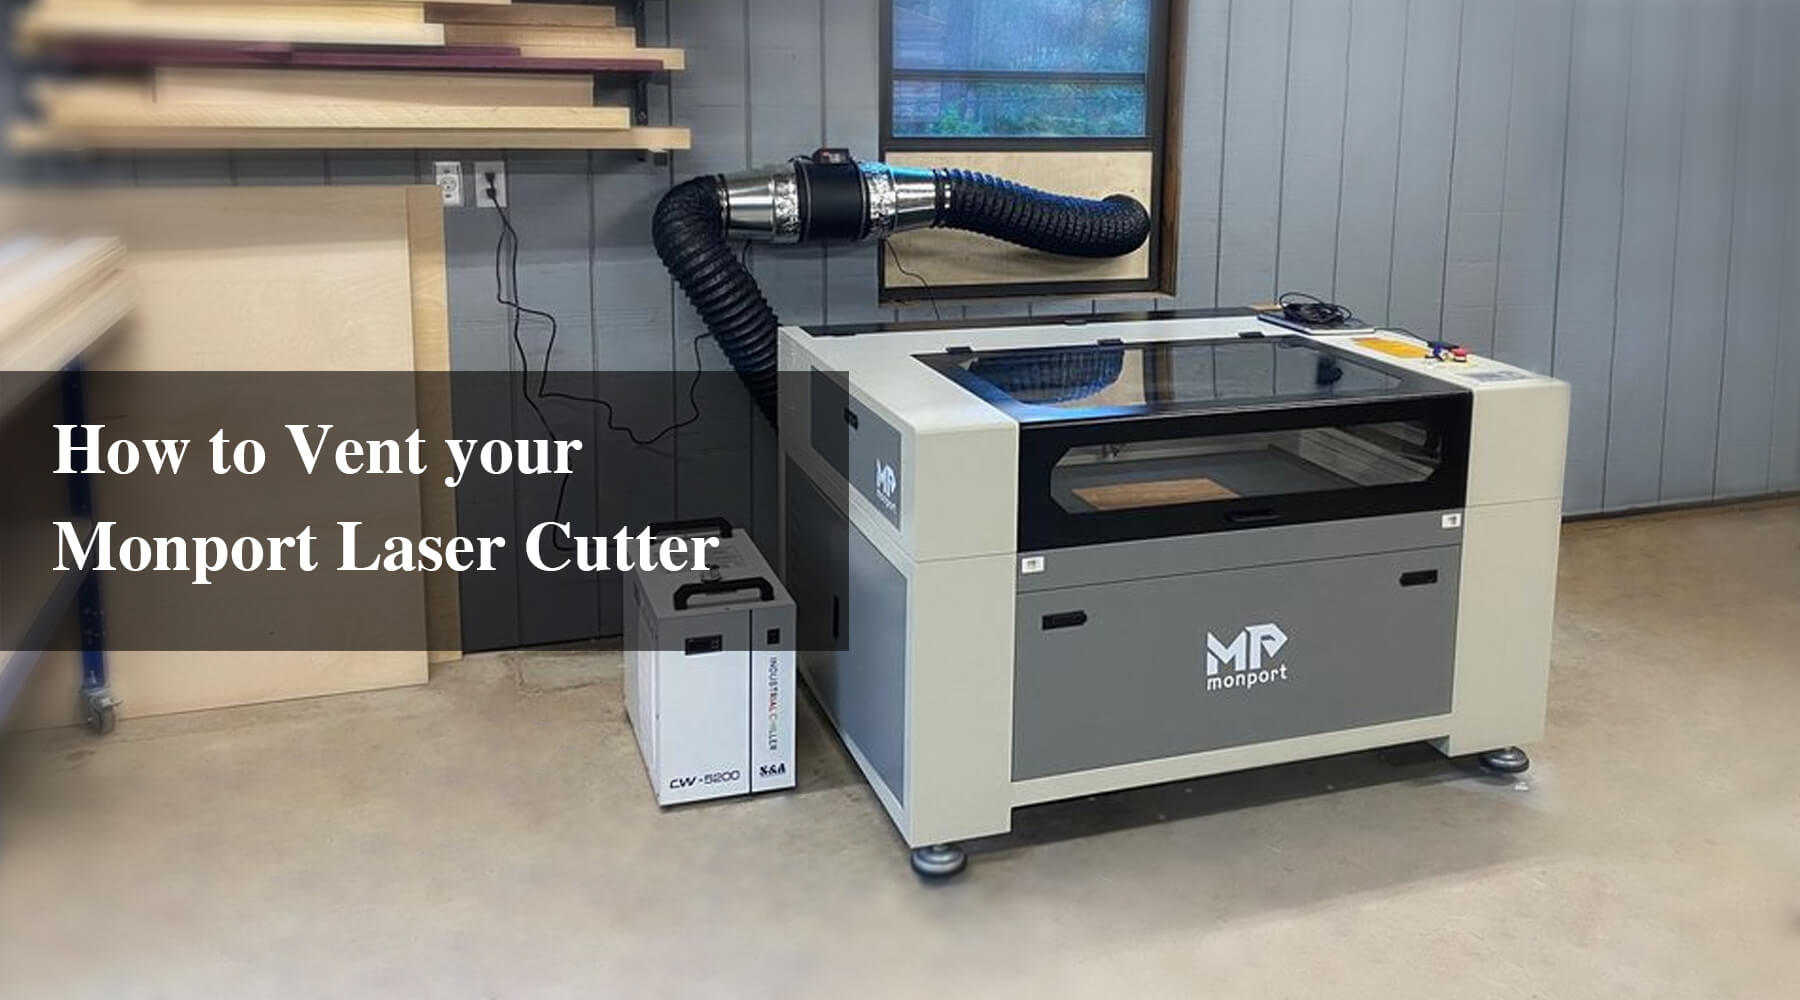 How to Vent Your Monport Laser Cutter